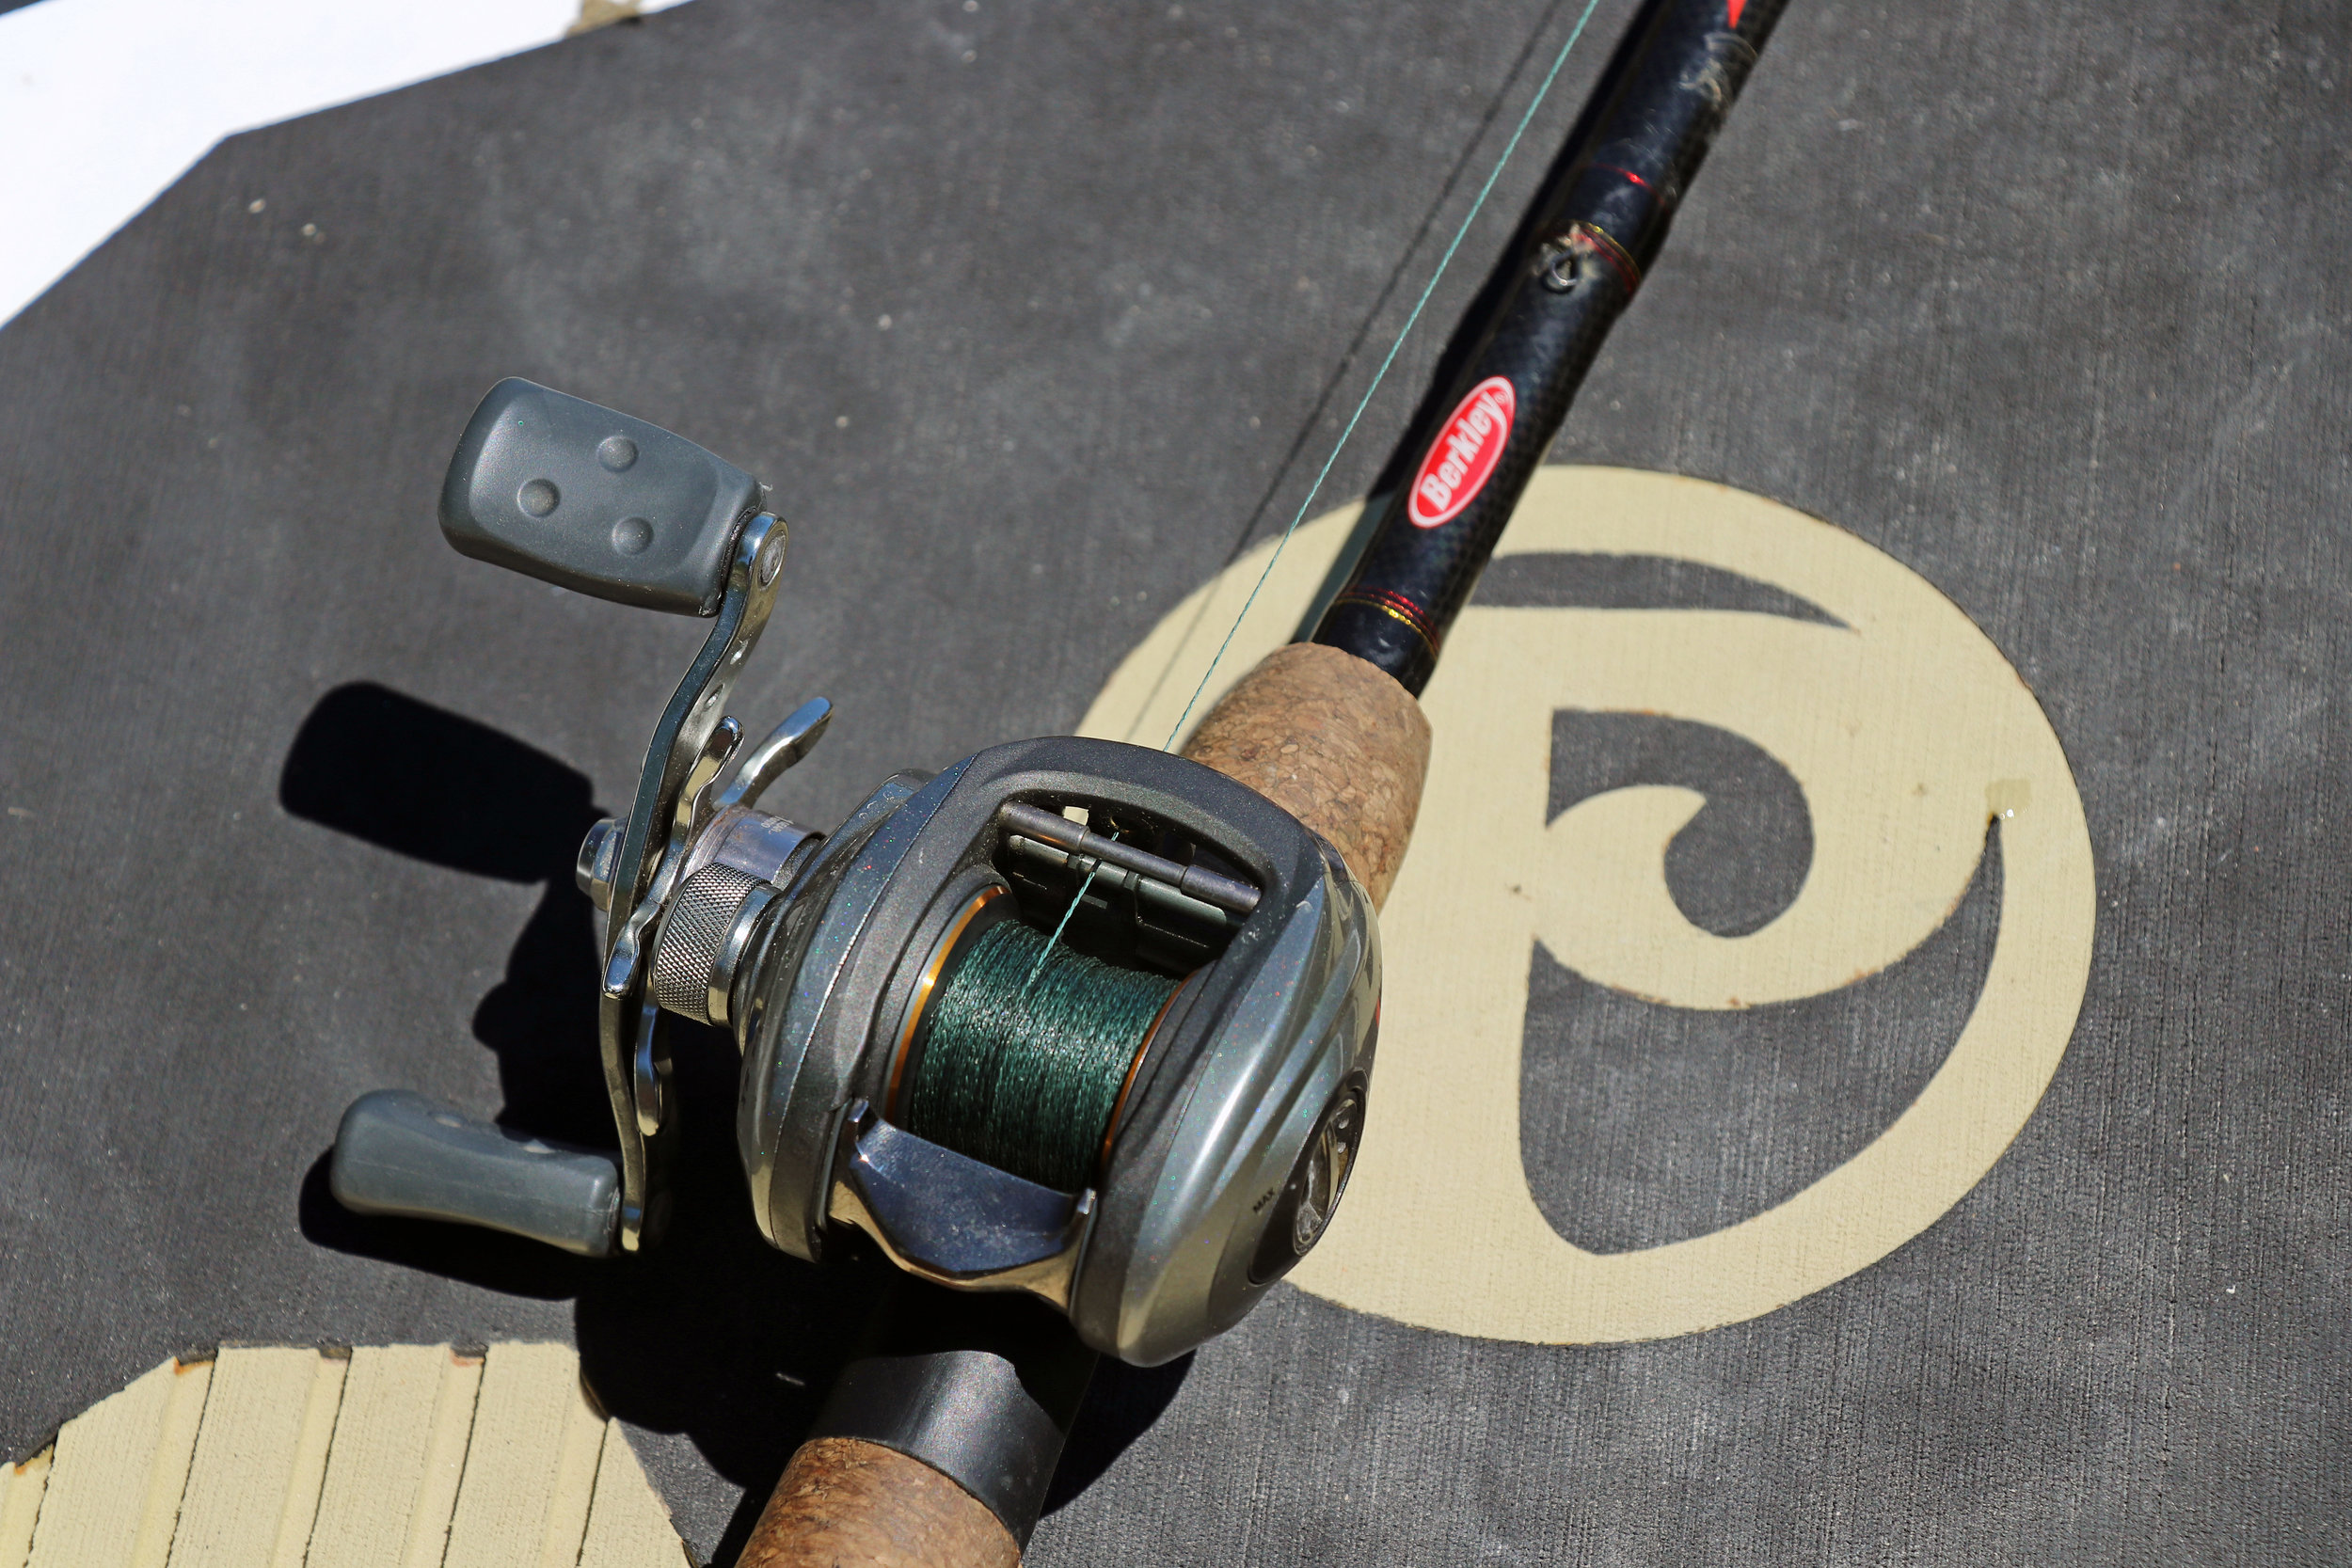 Why You Really Only Need Two Fishing Rod and Reel Setups — Texas Kayak  Fisher